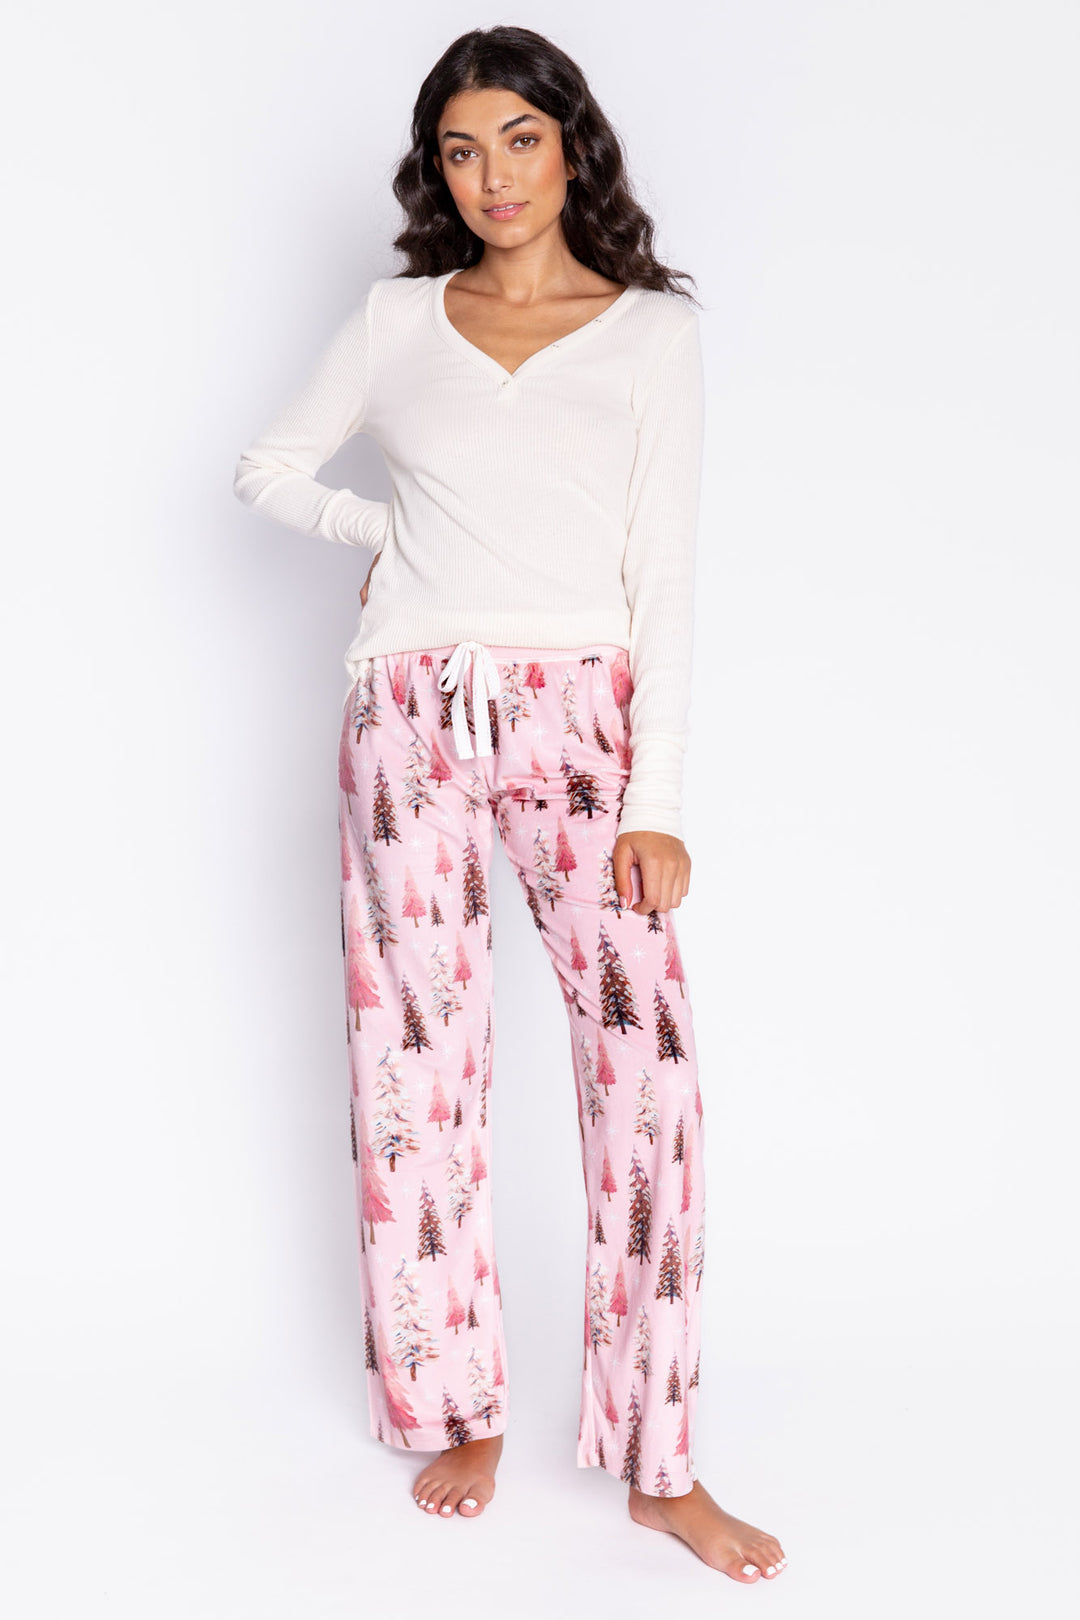 HAPPY BY NATURE PANT - PJ SALVAGE